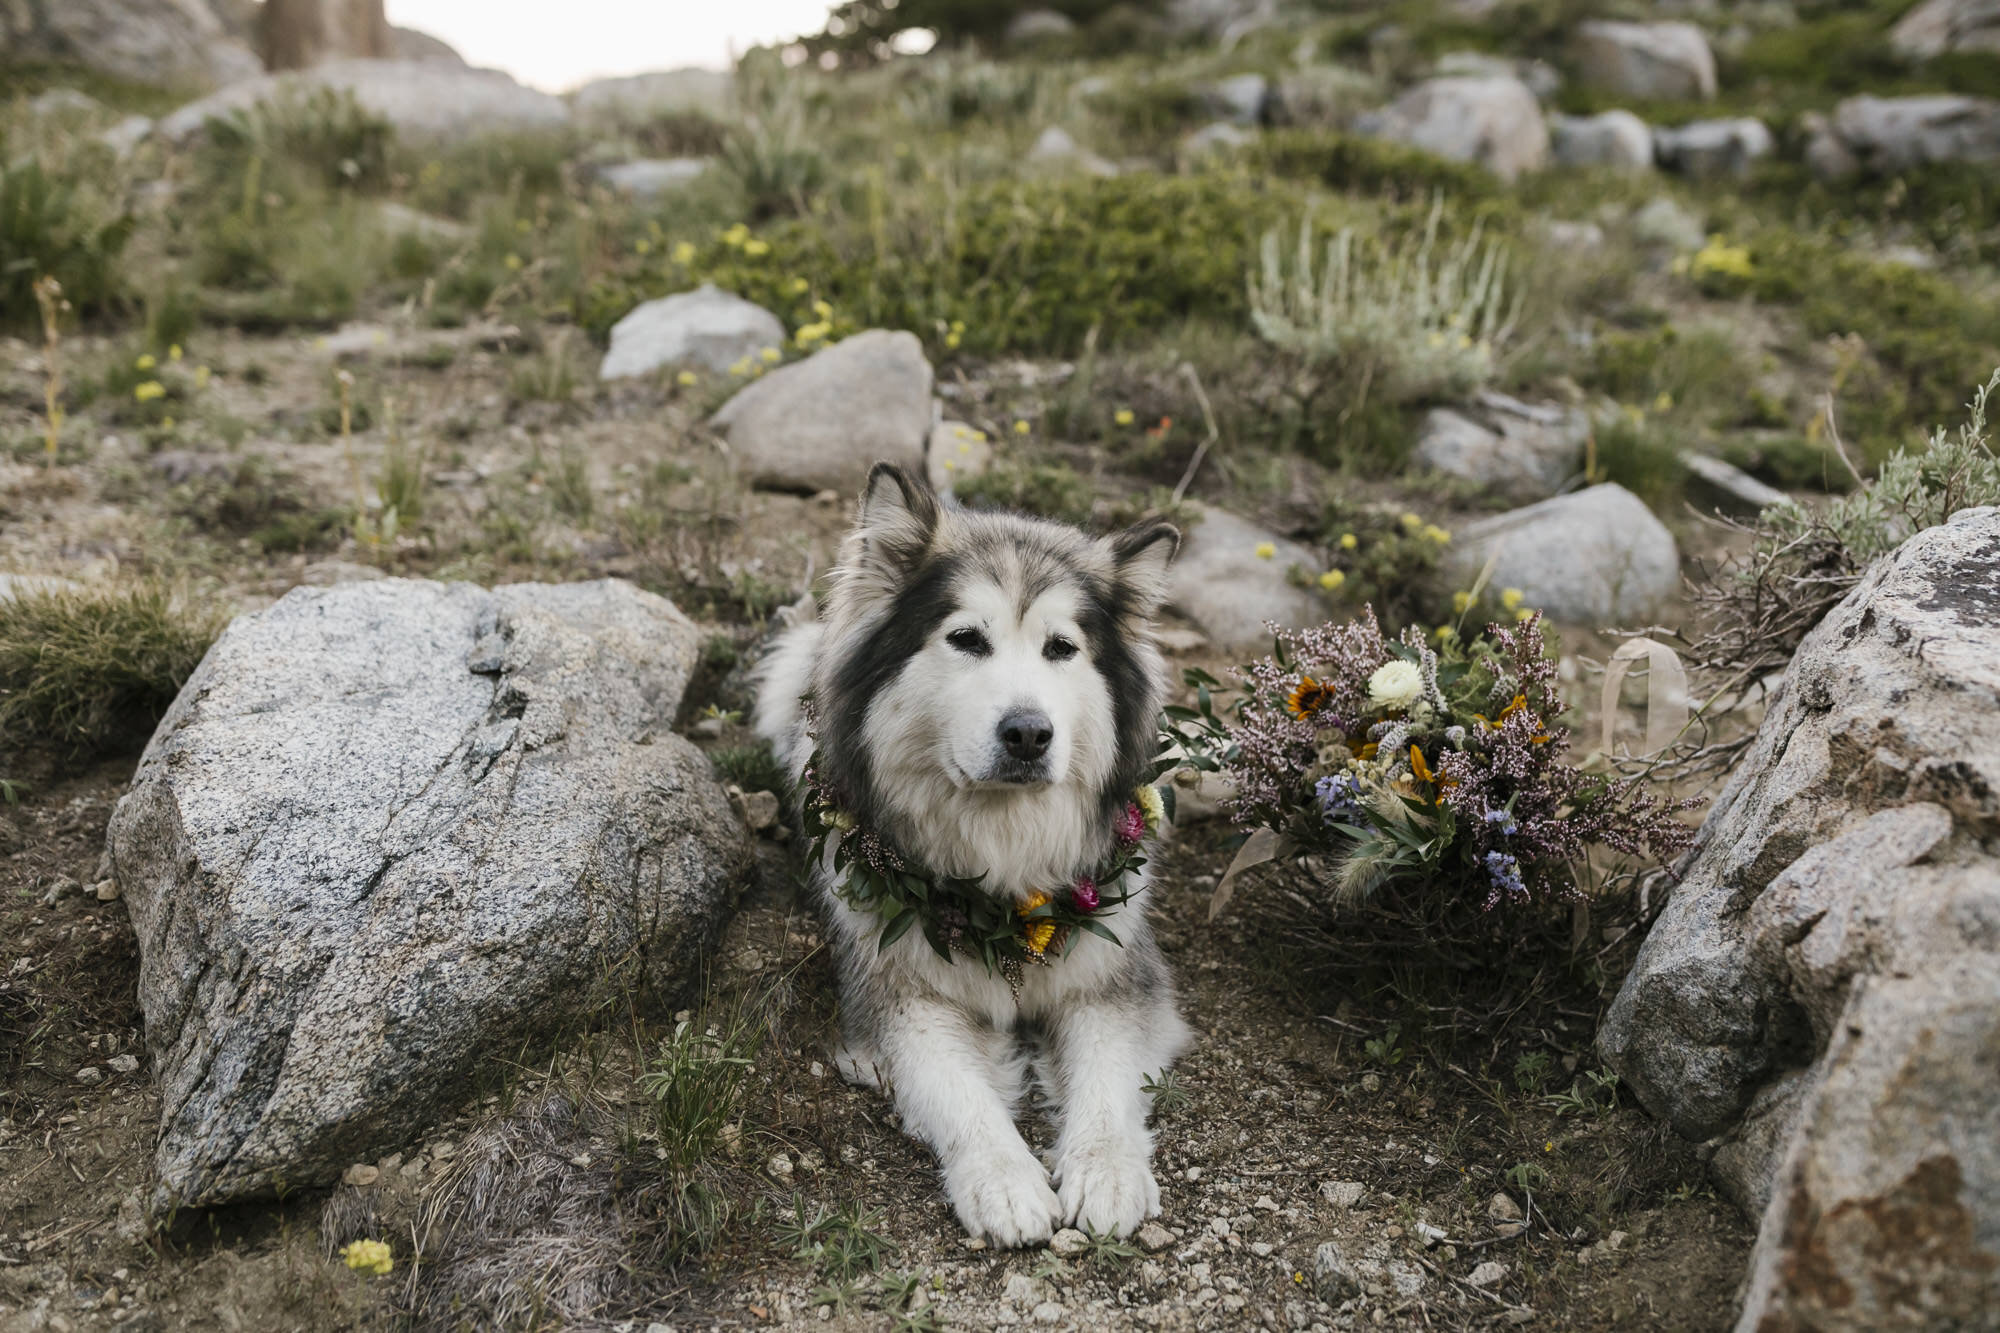 Alaskan Malamute flower dog lays down next to her mom's wedding bouquet in the mountains